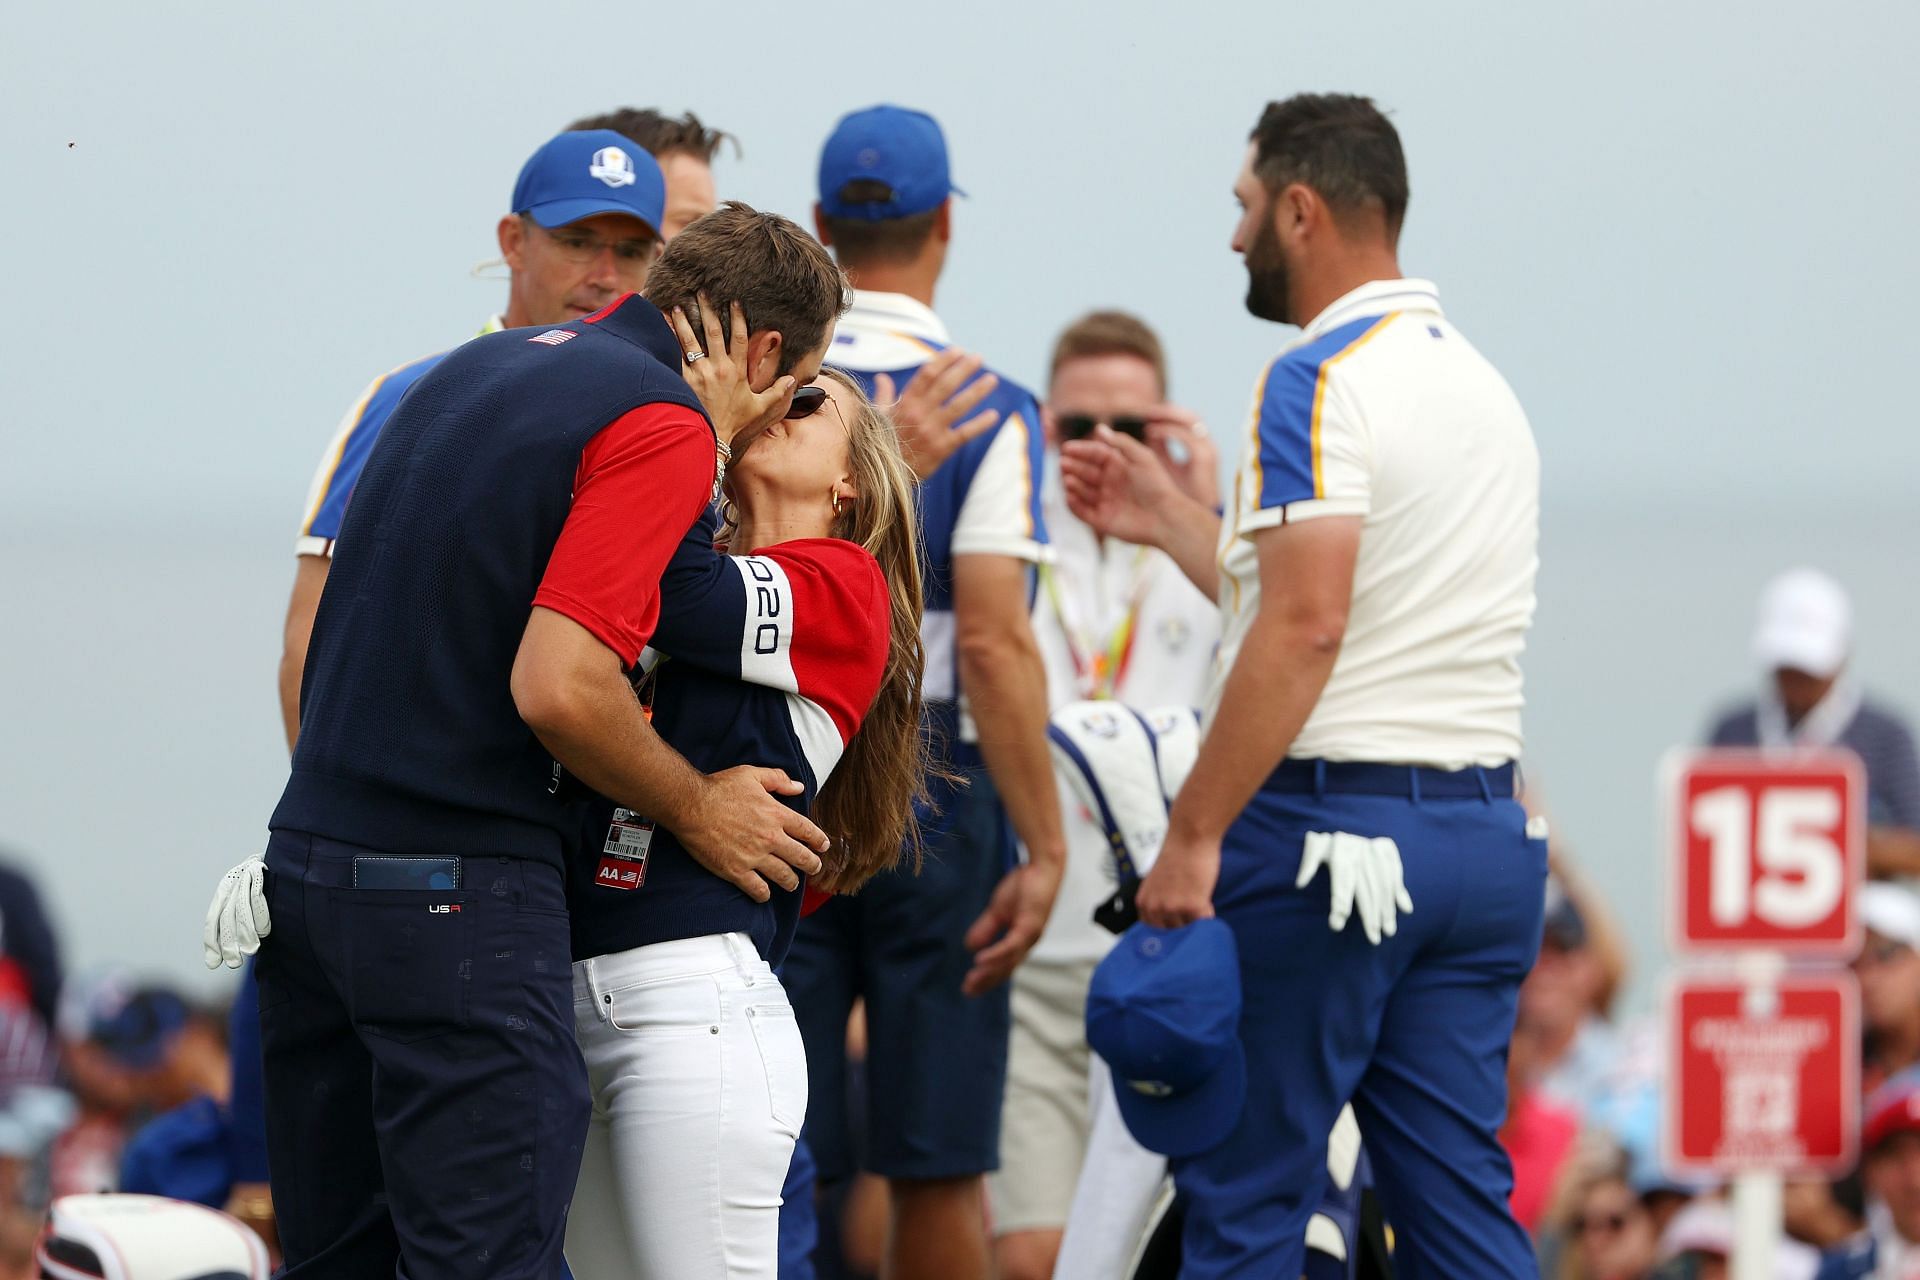 The Schefflers at the 43rd Ryder Cup